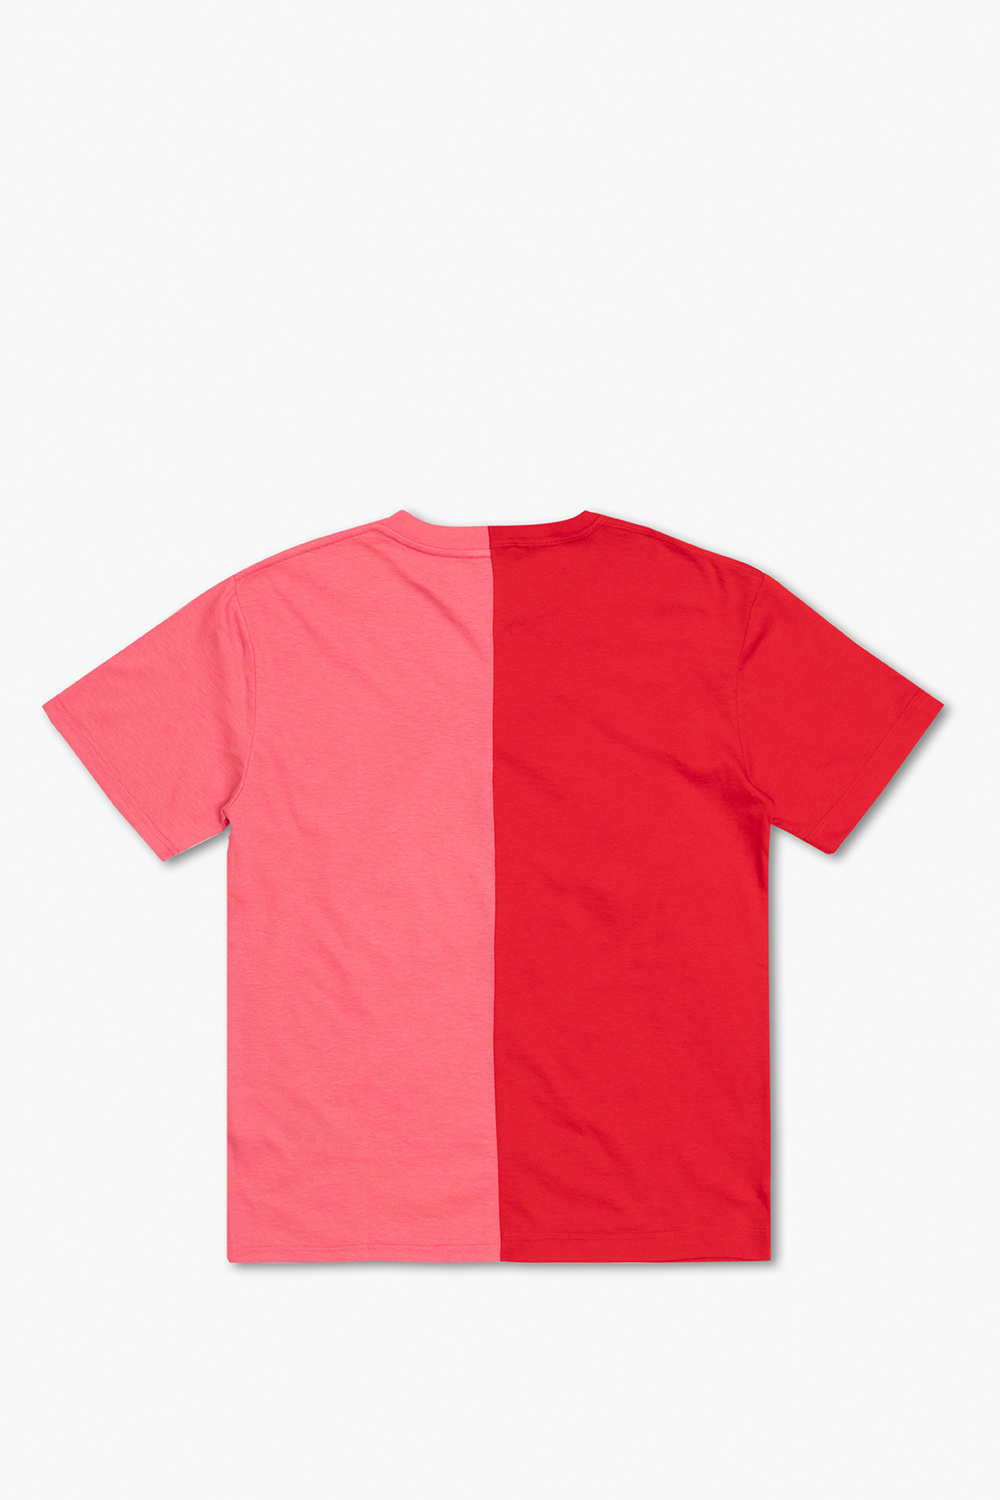 gucci not Kids T-shirt with logo